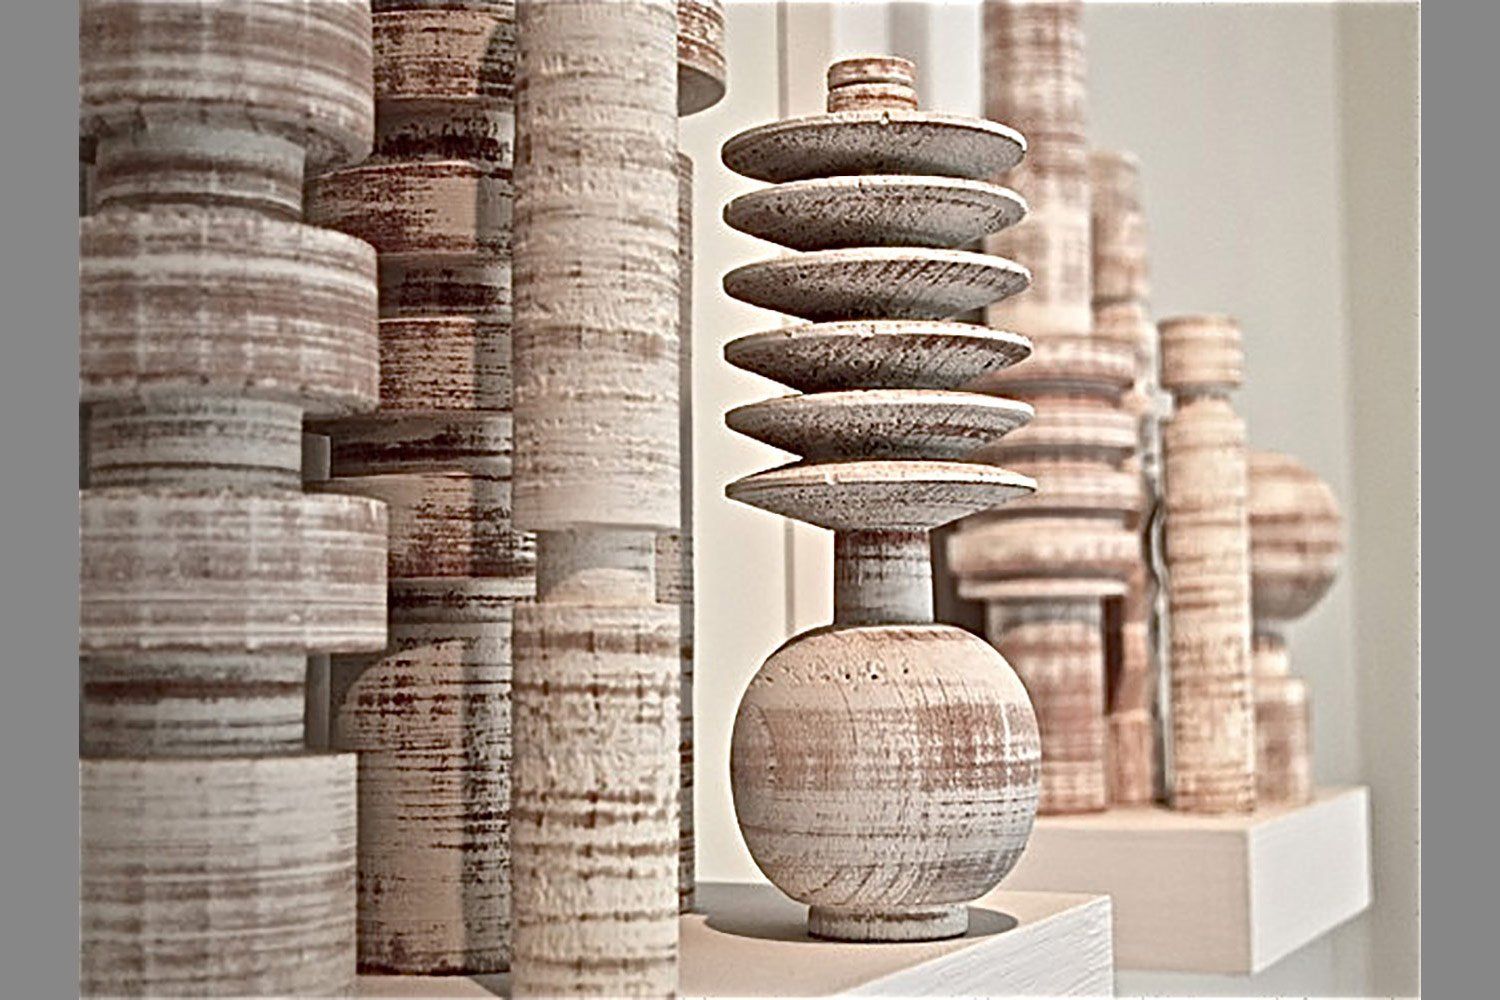 Clay and Wood JoAnn Patterson Sculpture